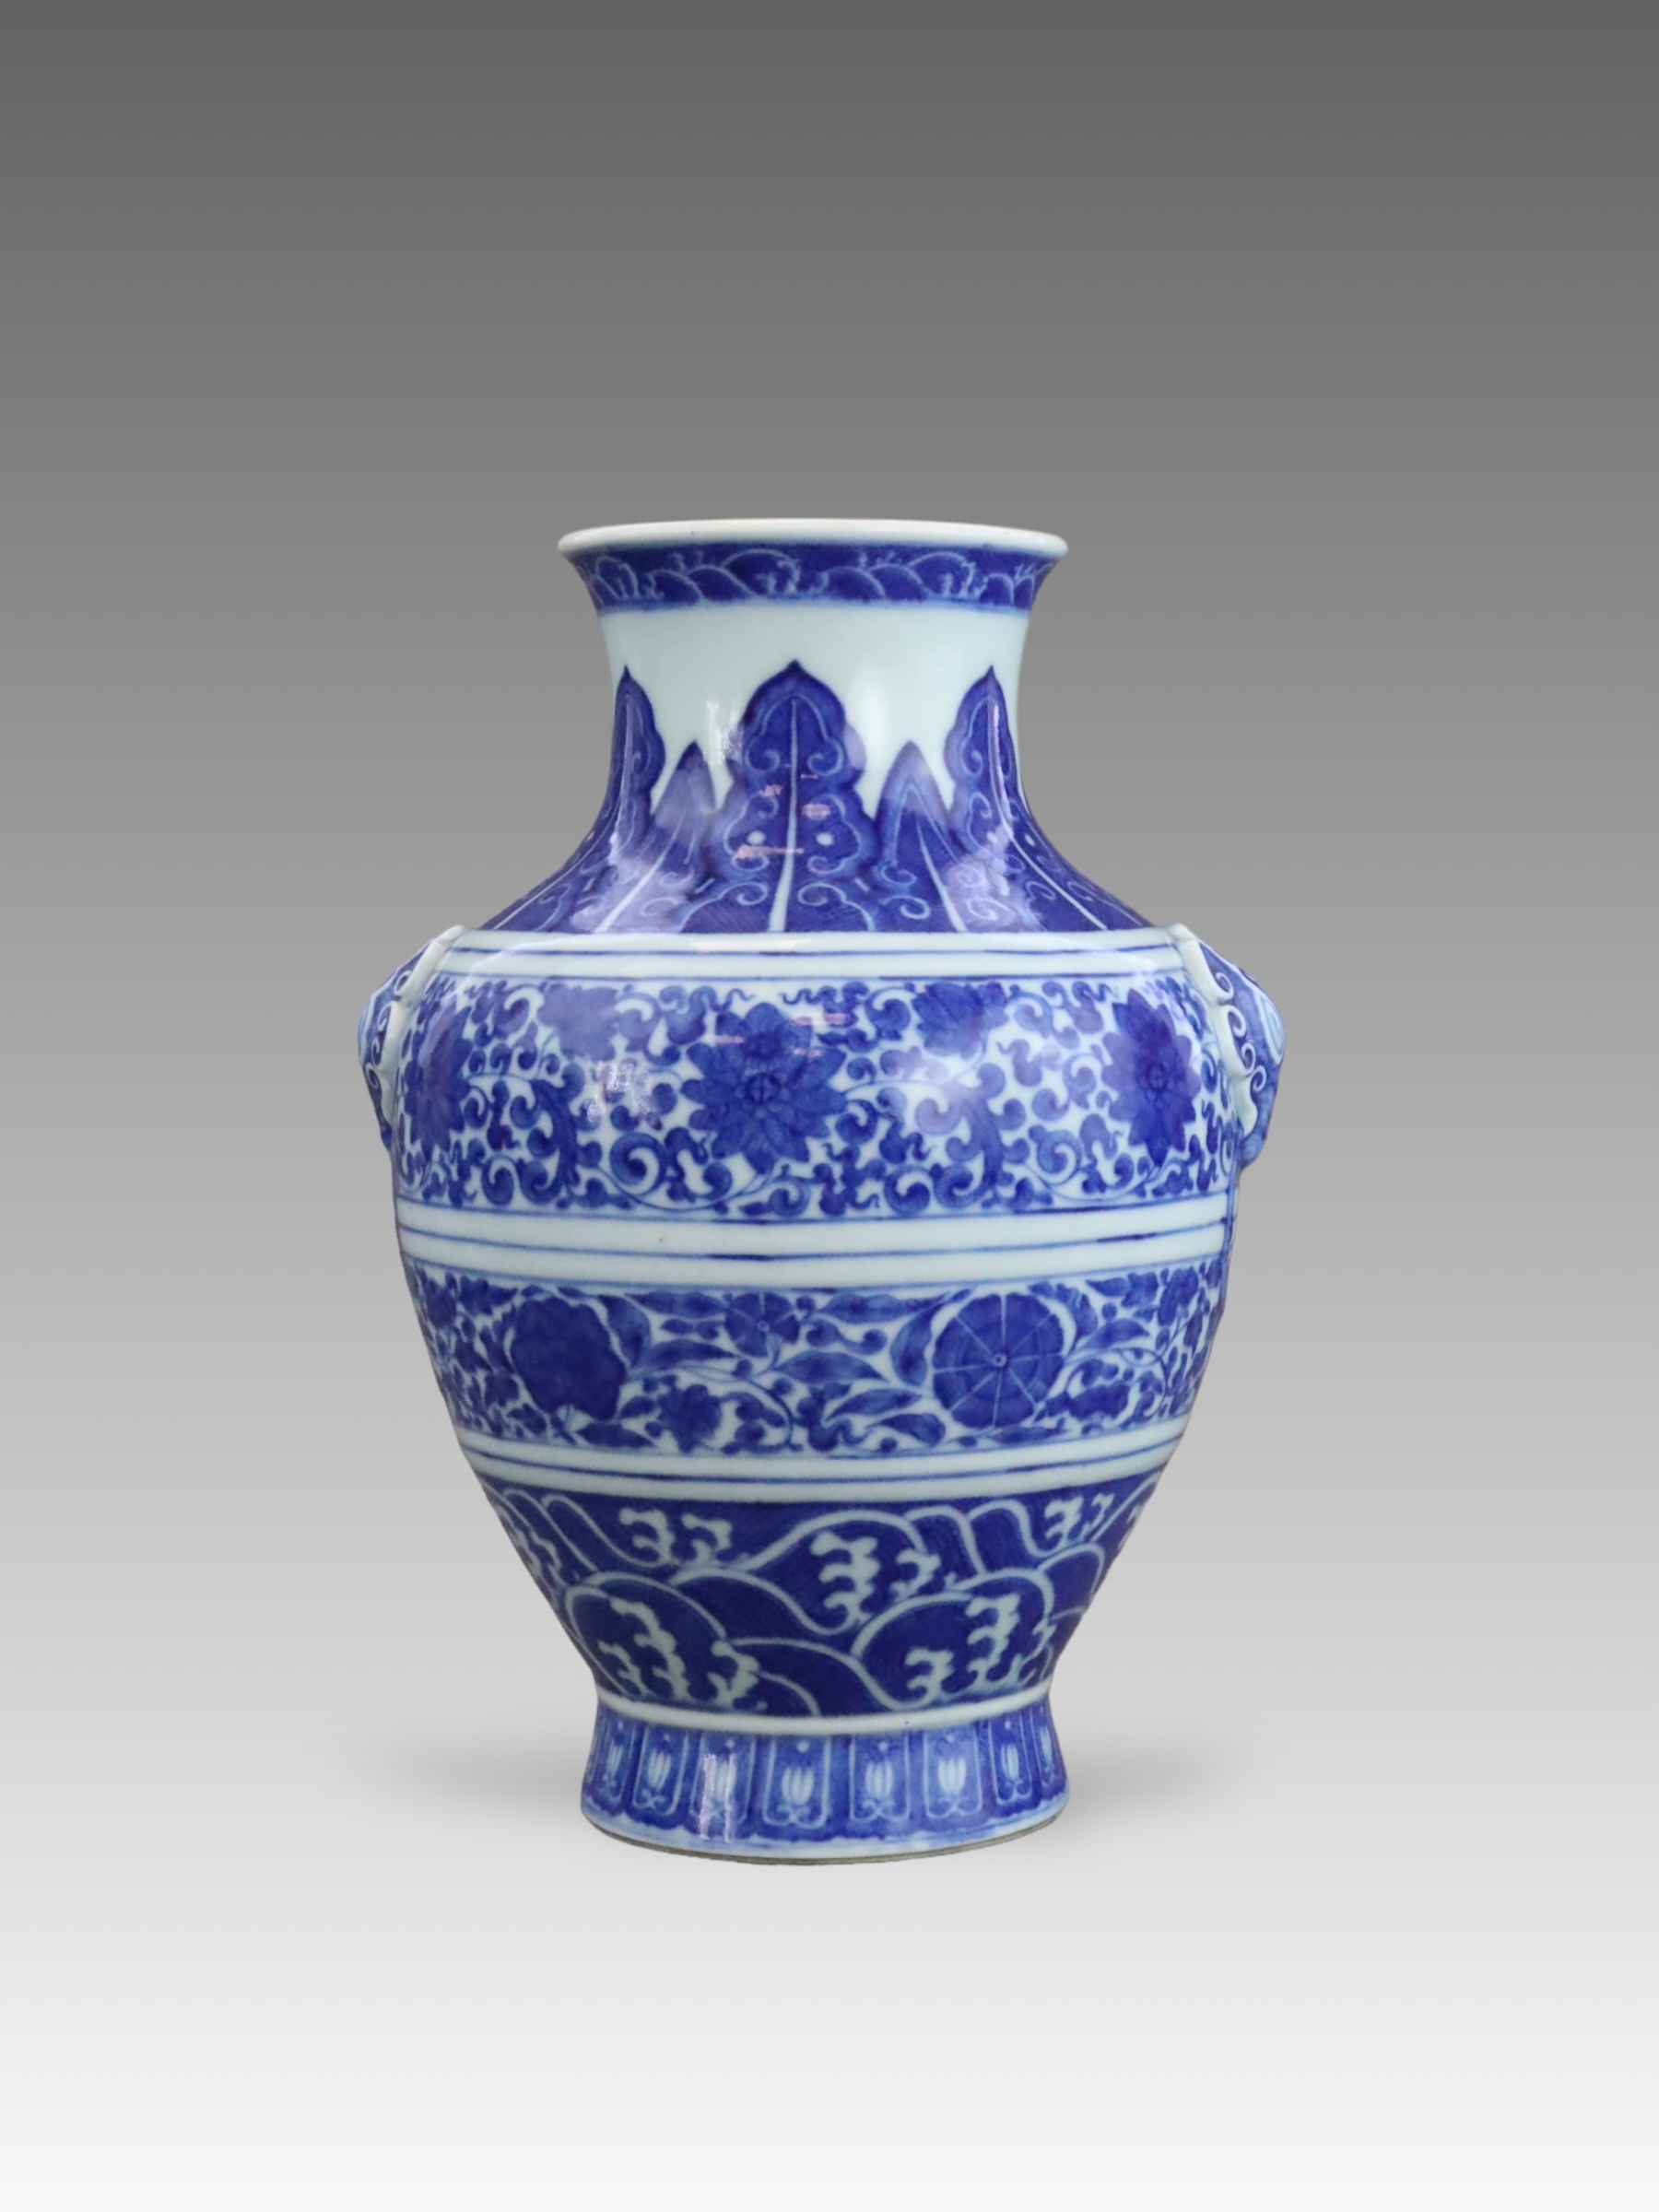 A Good Blue and White Ming style Vase, hu, six character seal mark of Qianlong, Qing dynasty,